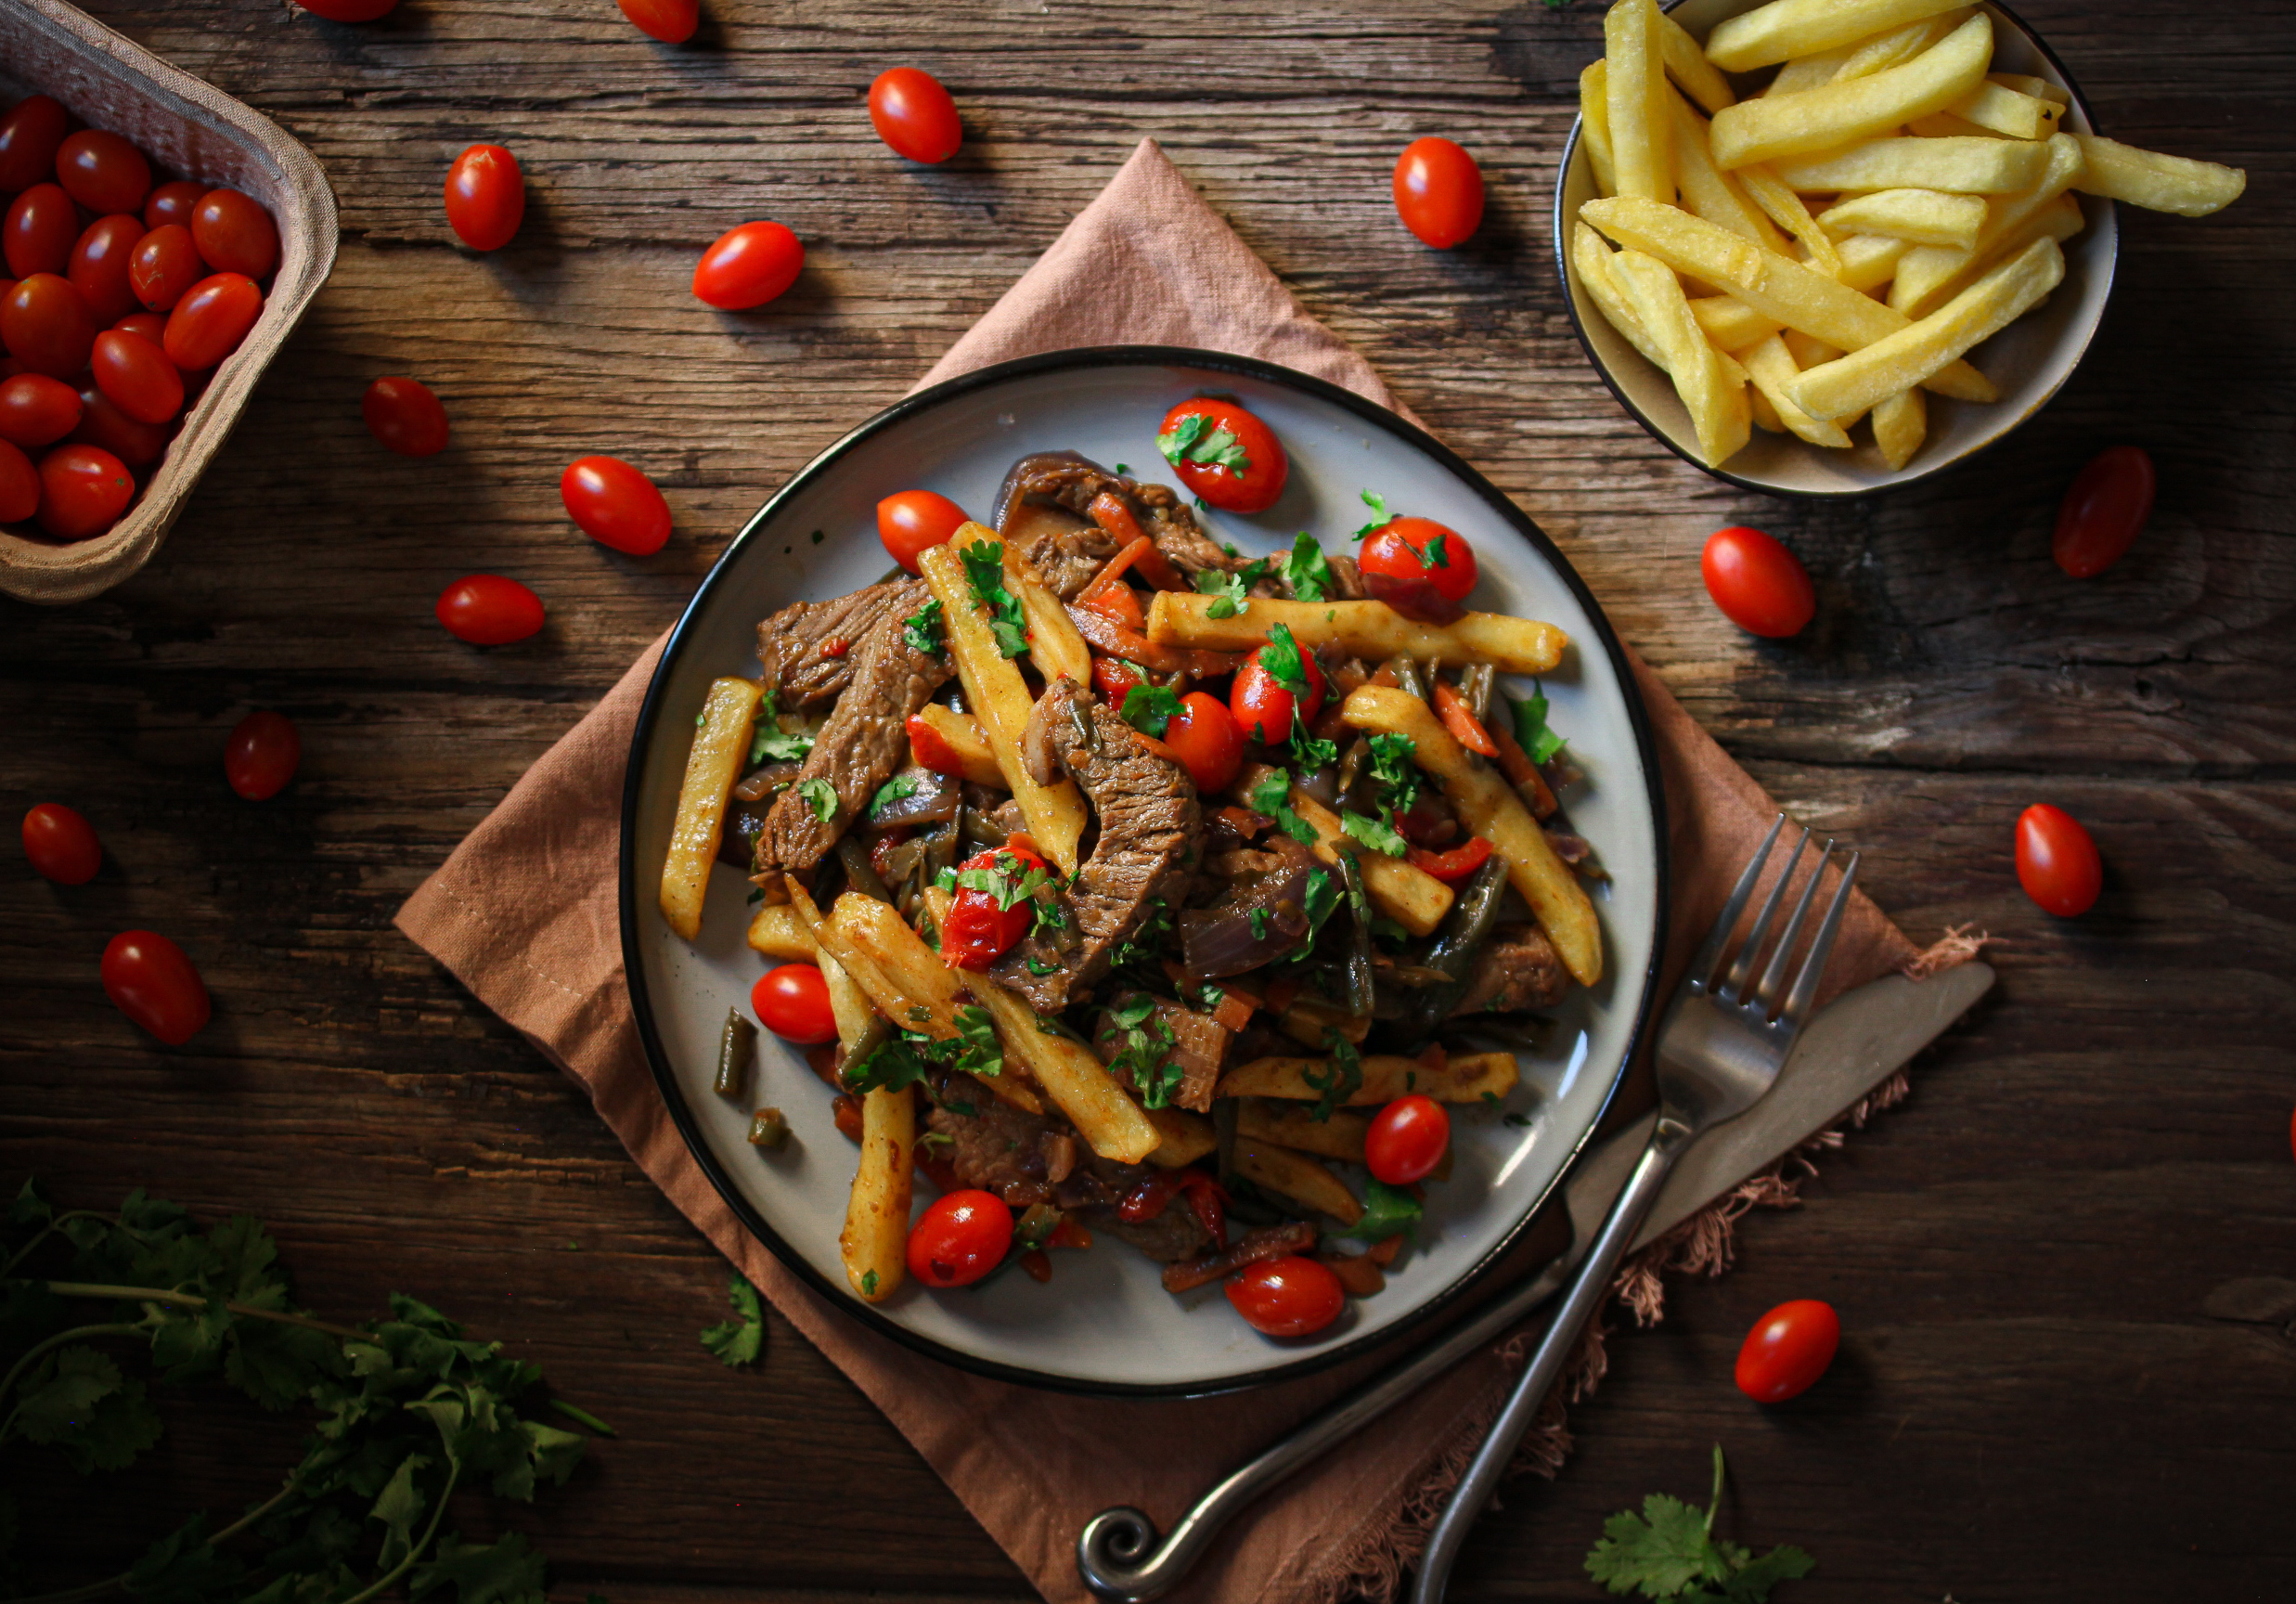 Peruvian Style Beef and Chips, Lomo Saltado